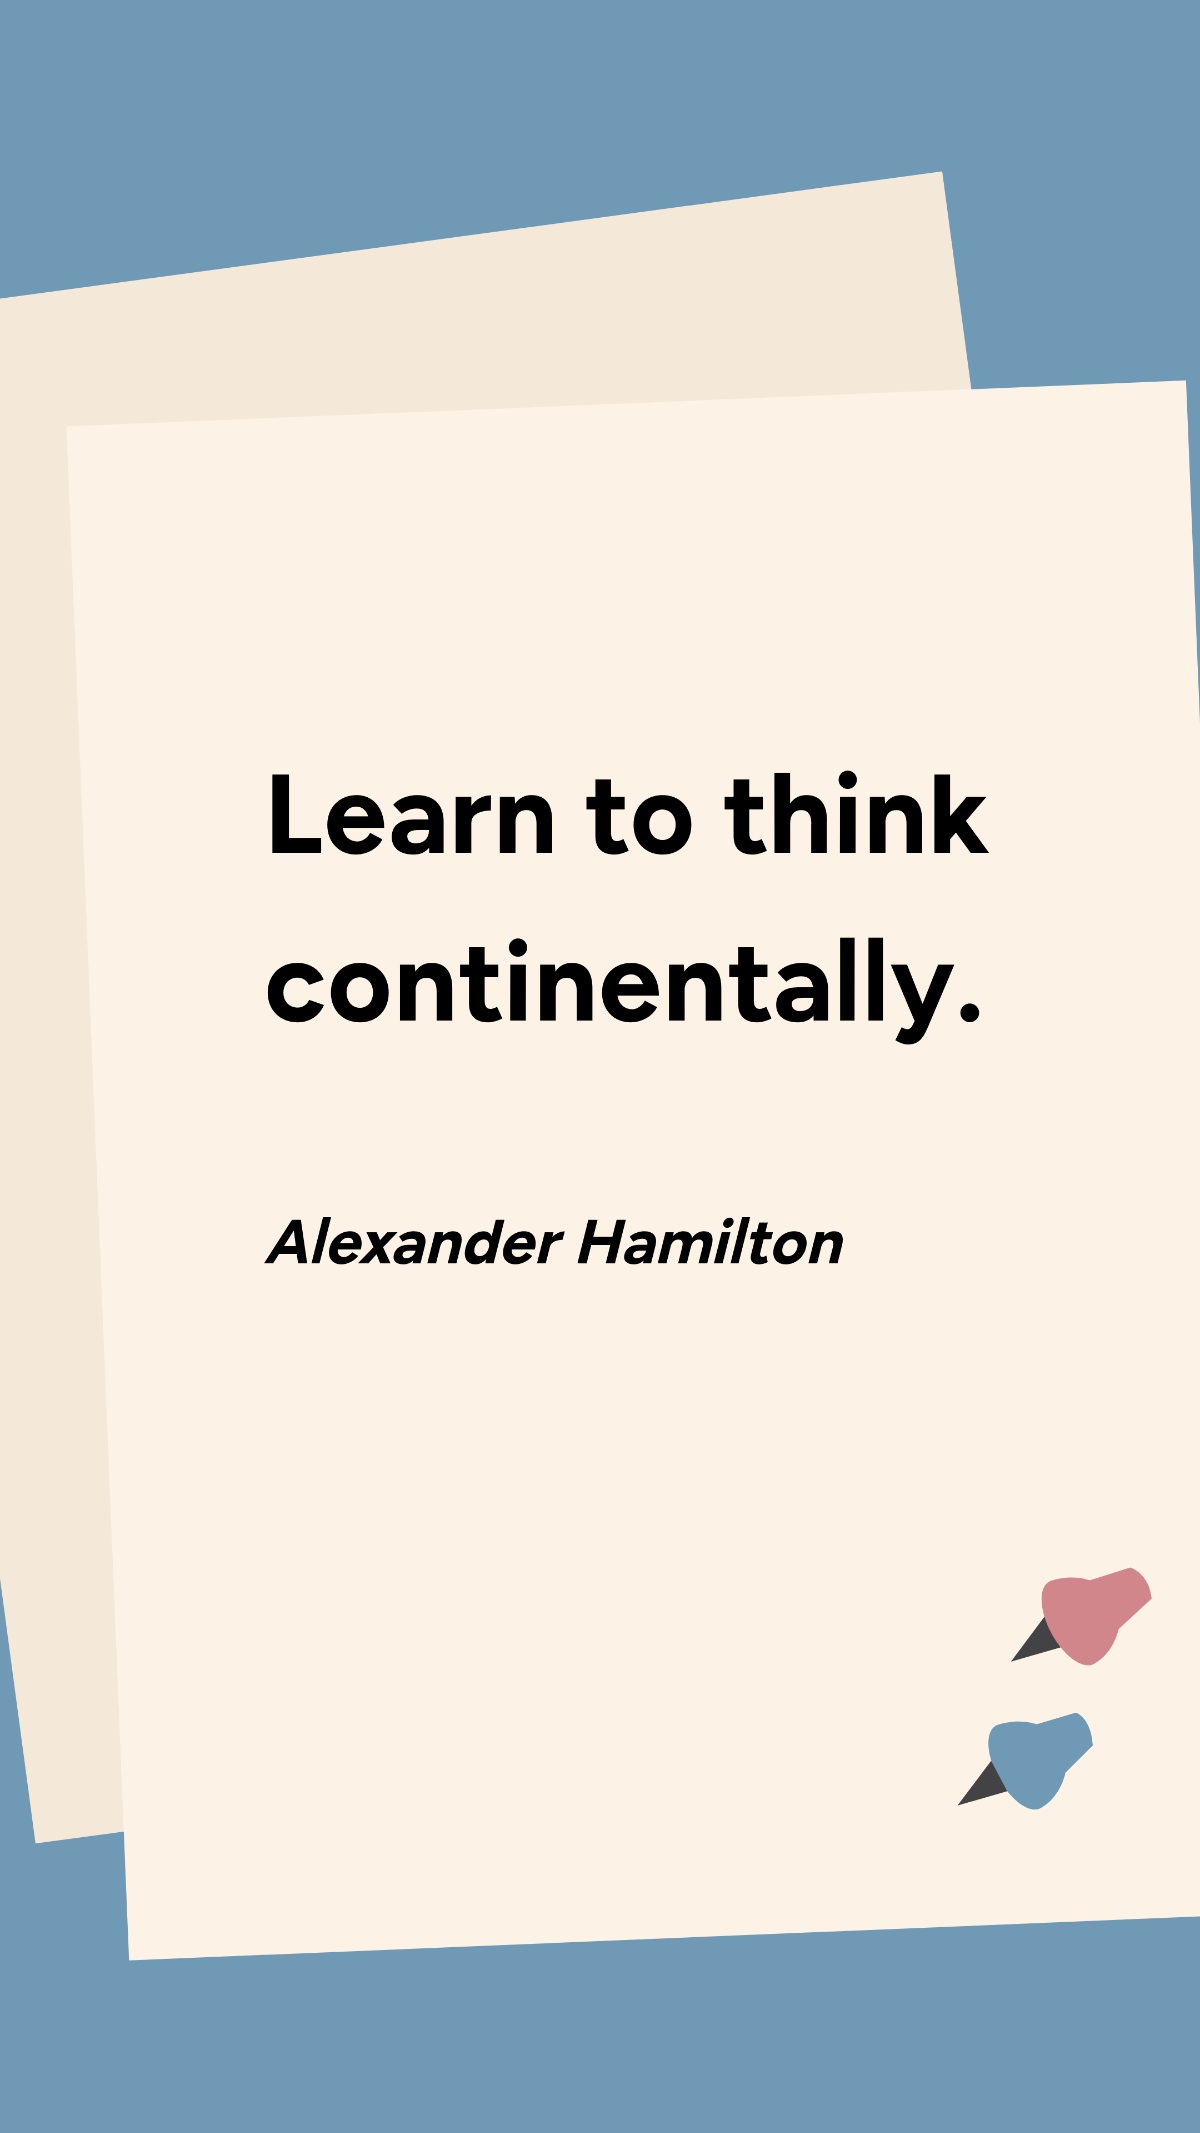 Alexander Hamilton - Learn to think continentally. Template